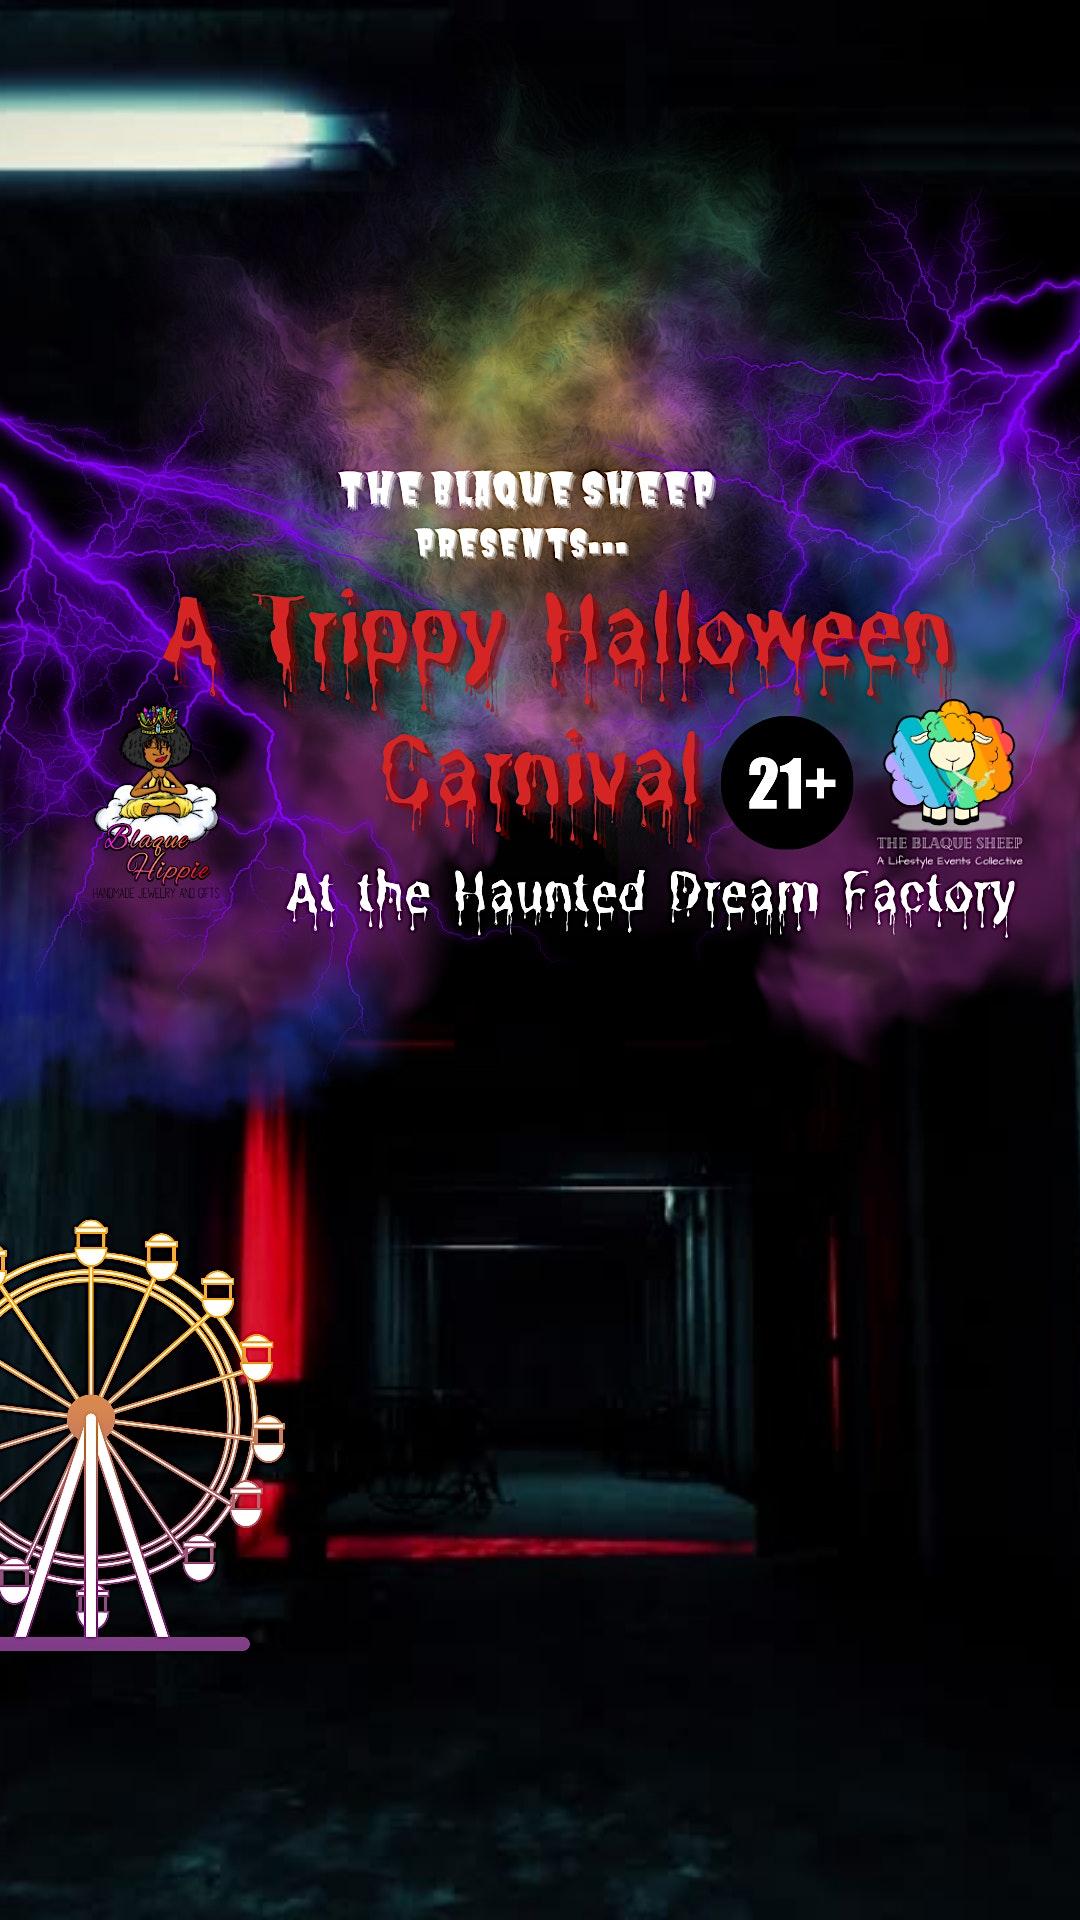 The Blaque Sheep Presents: A Trippy Halloween Carnival
Fri Oct 28, 7:00 PM - Fri Oct 28, 11:30 PM
in 8 days